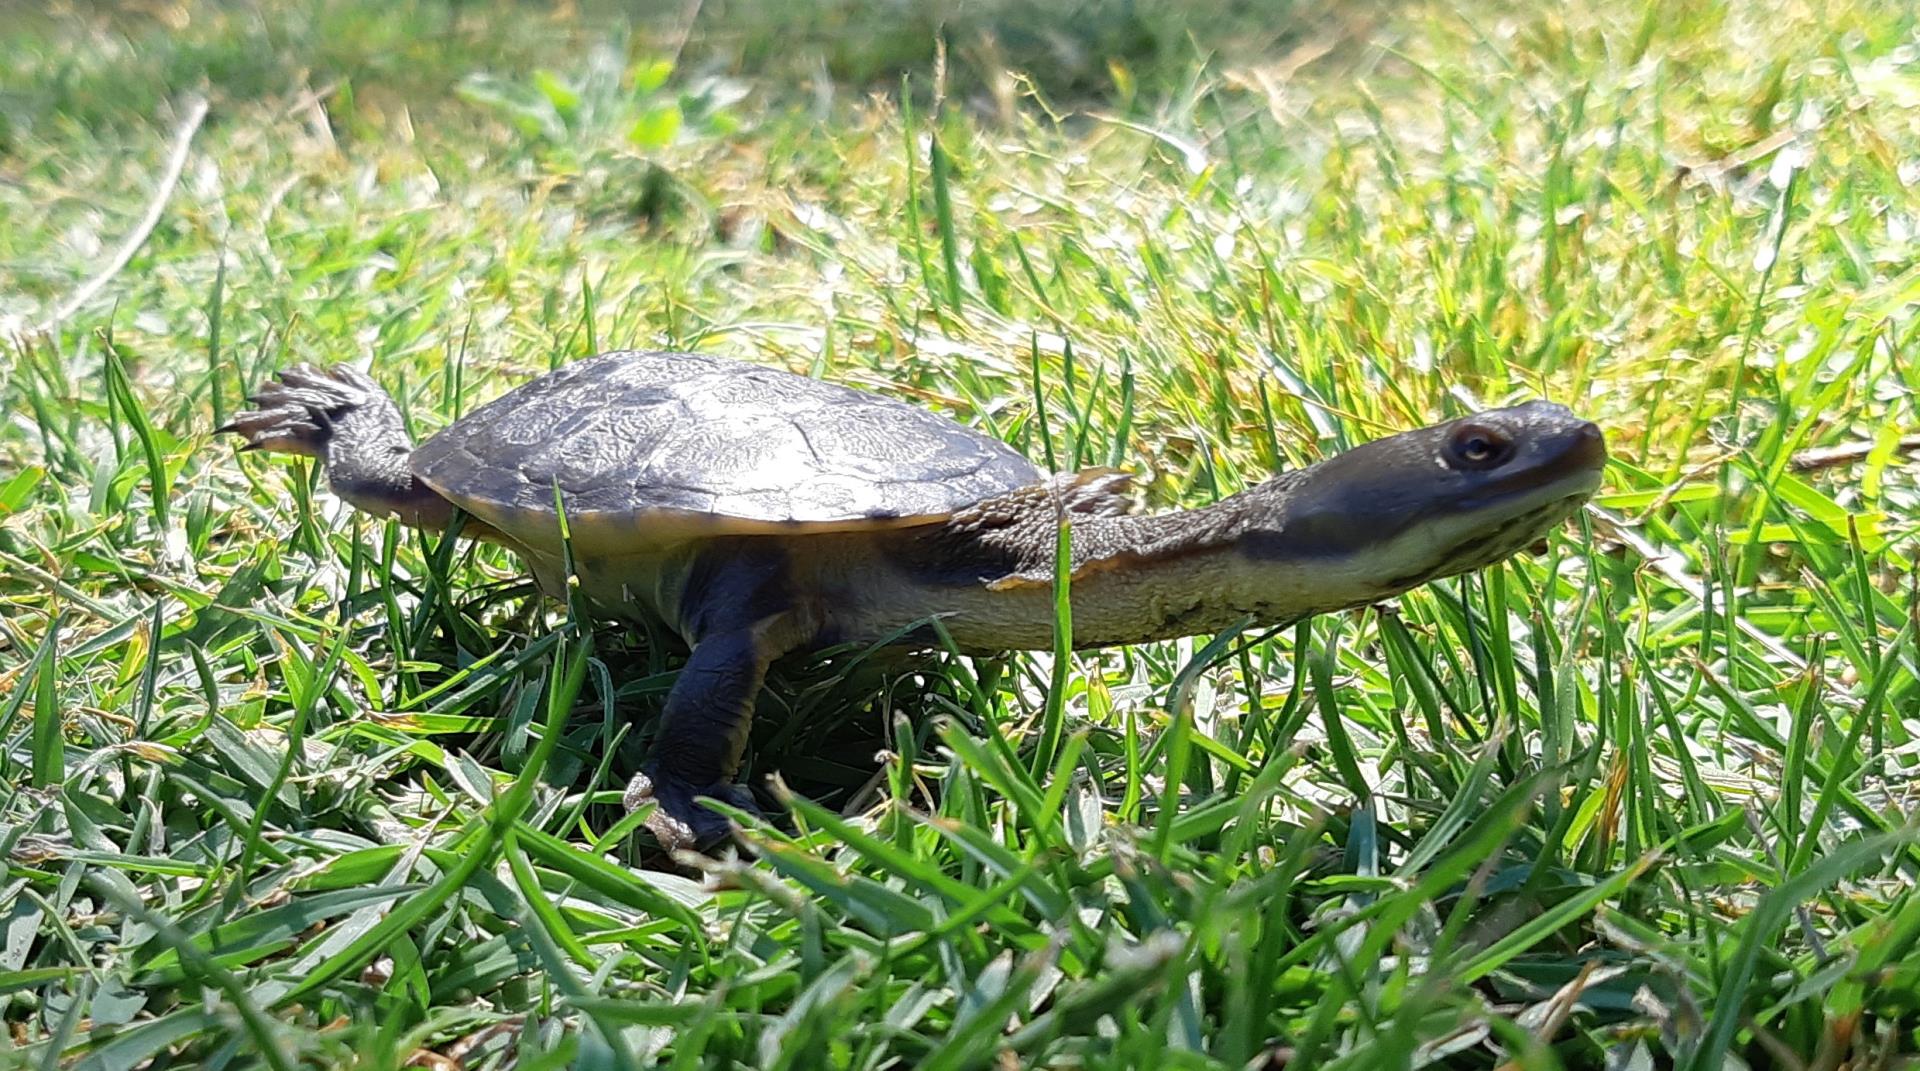 City embraces new app to conserve turtles